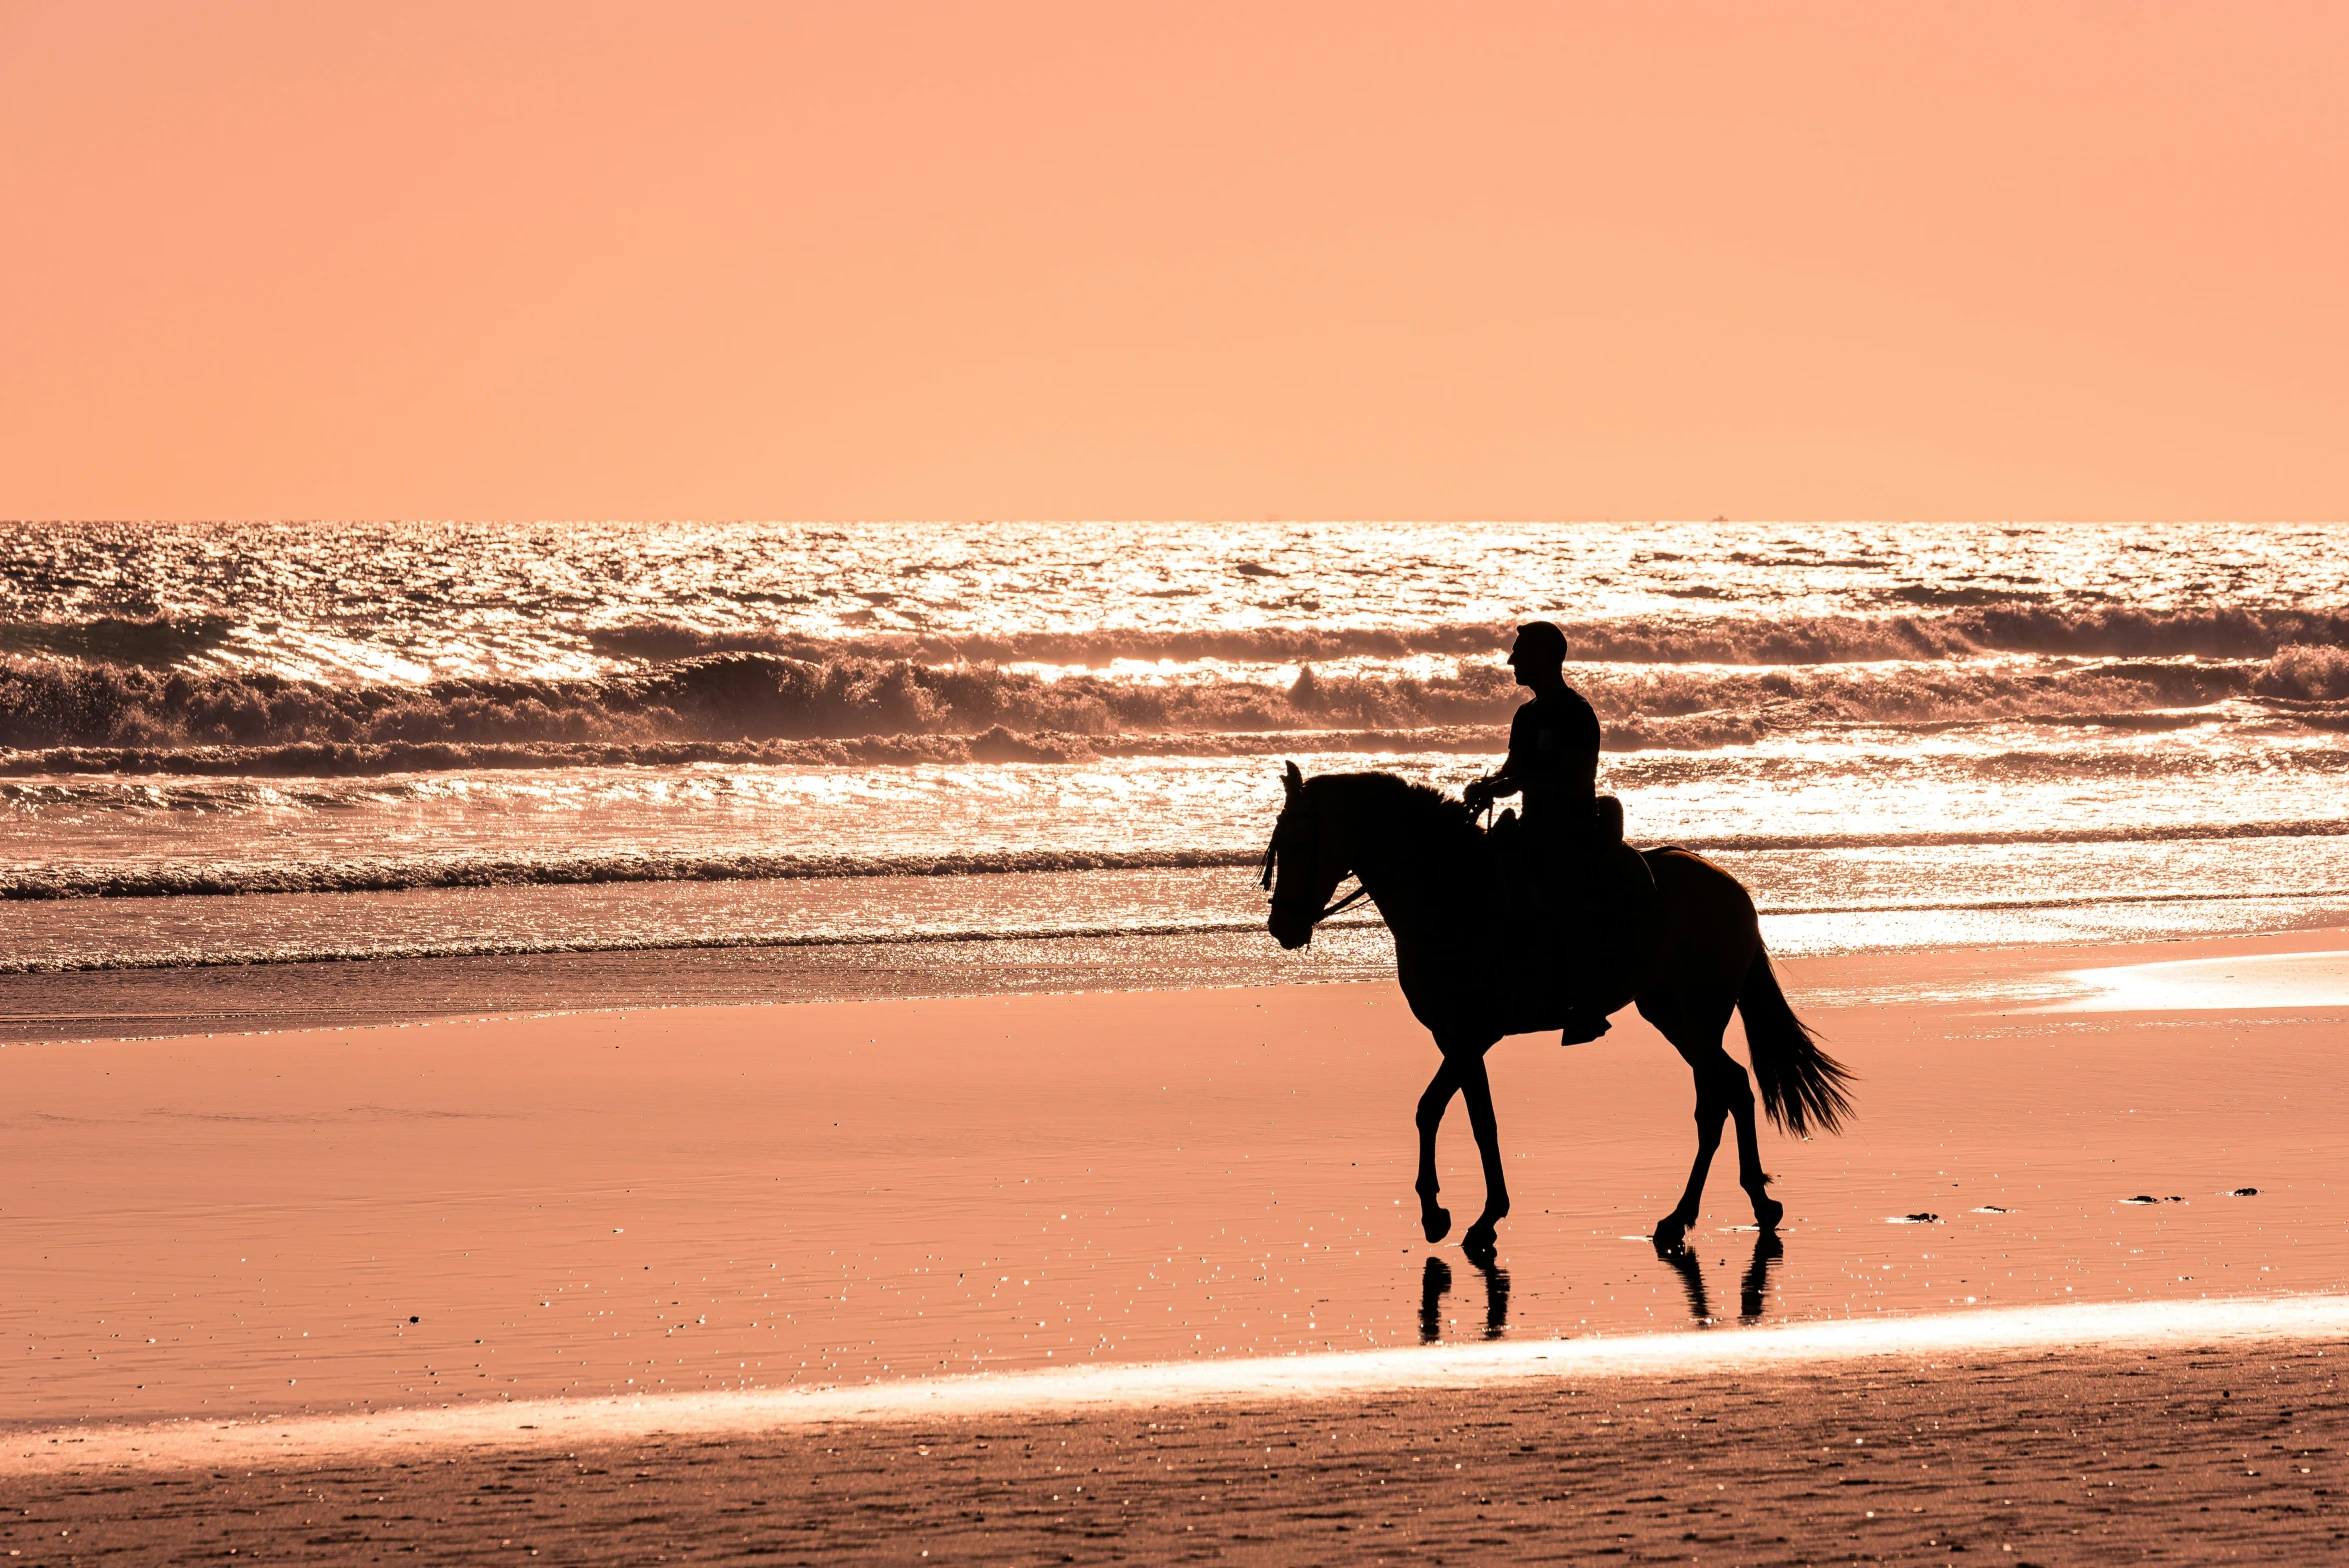 the silhouette of a person riding on the back of a horse